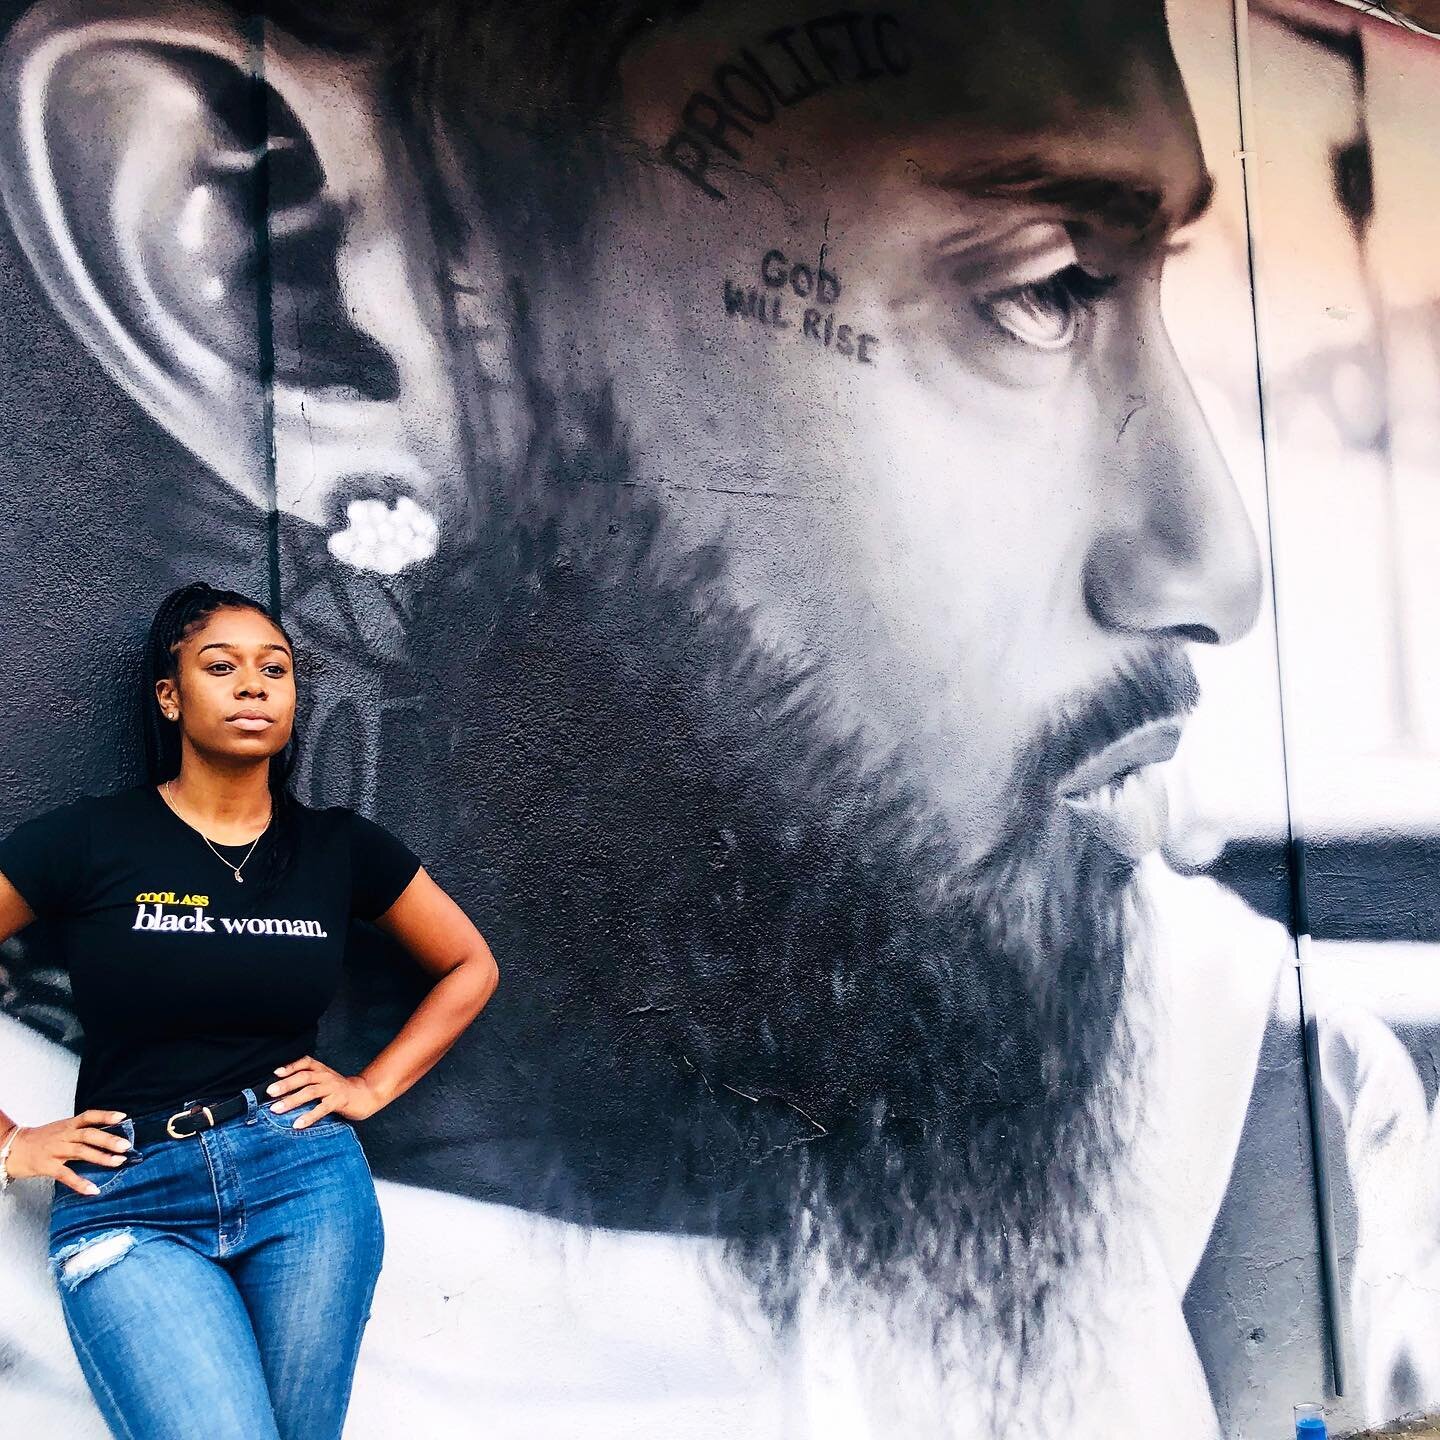 &ldquo;i&rsquo;m about seeing long-term, seeing a vision, understanding nothing really worthwhile happens overnight, and just sticking to your script long enough to make something real happen.&rdquo;

-nipsey hussle 
&bull; 
#livelifegolden #heartofg